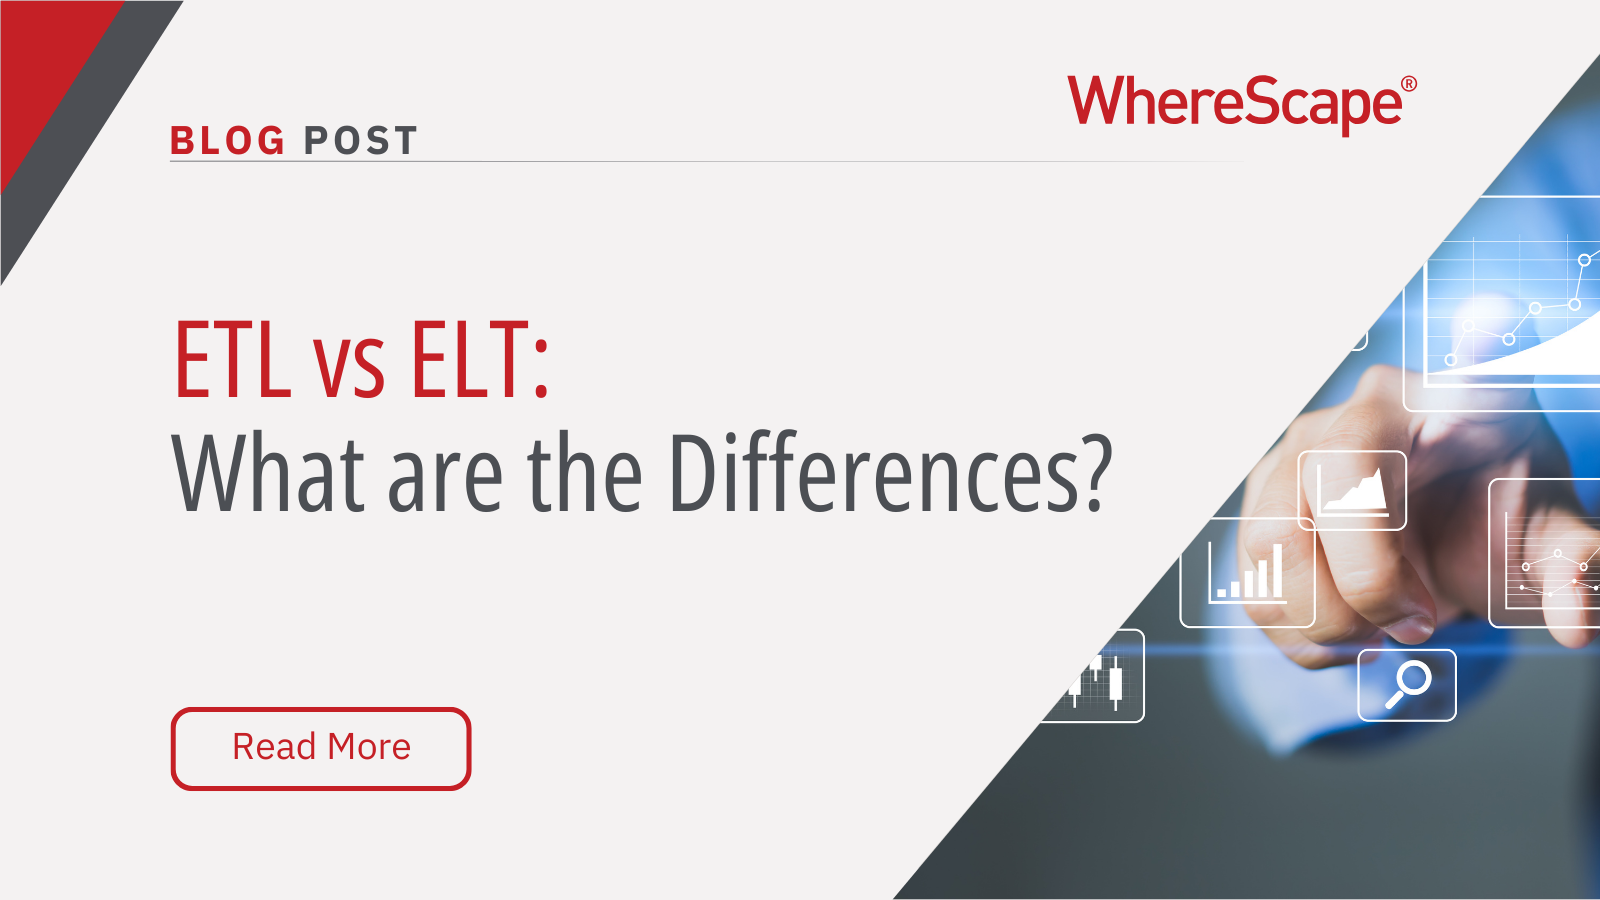 ETL vs ELT: What are the Differences?